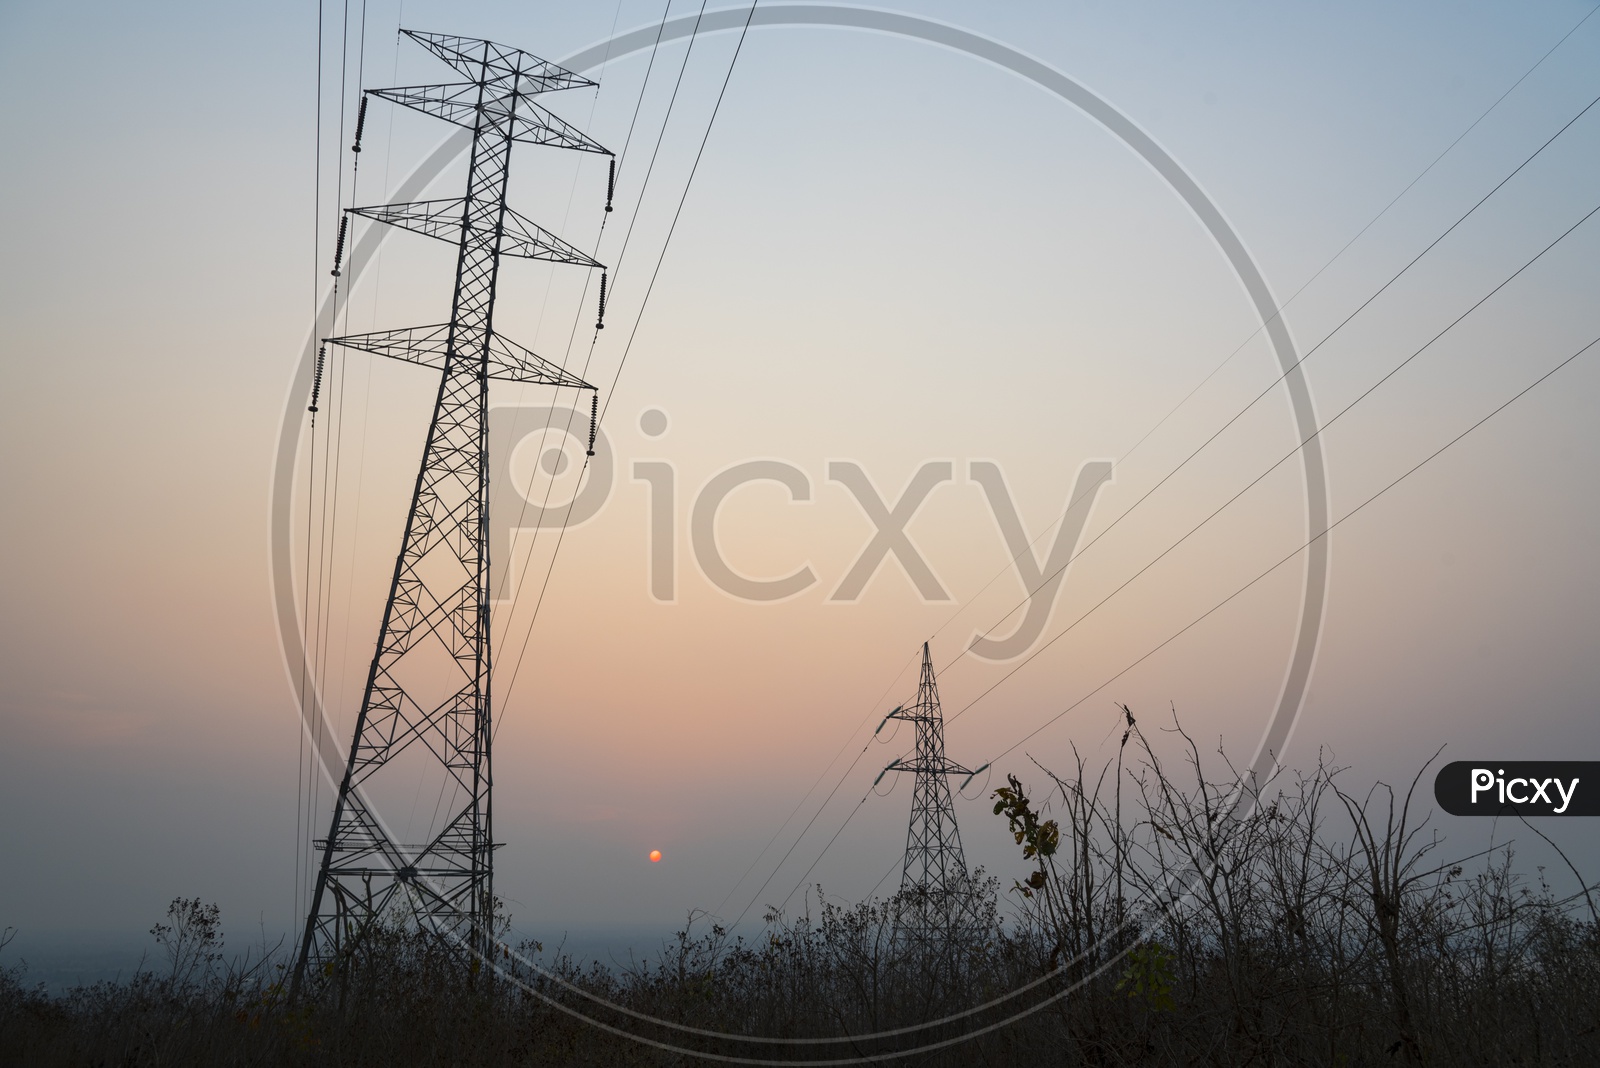 Hi tension Thailand transmission towers during sunset